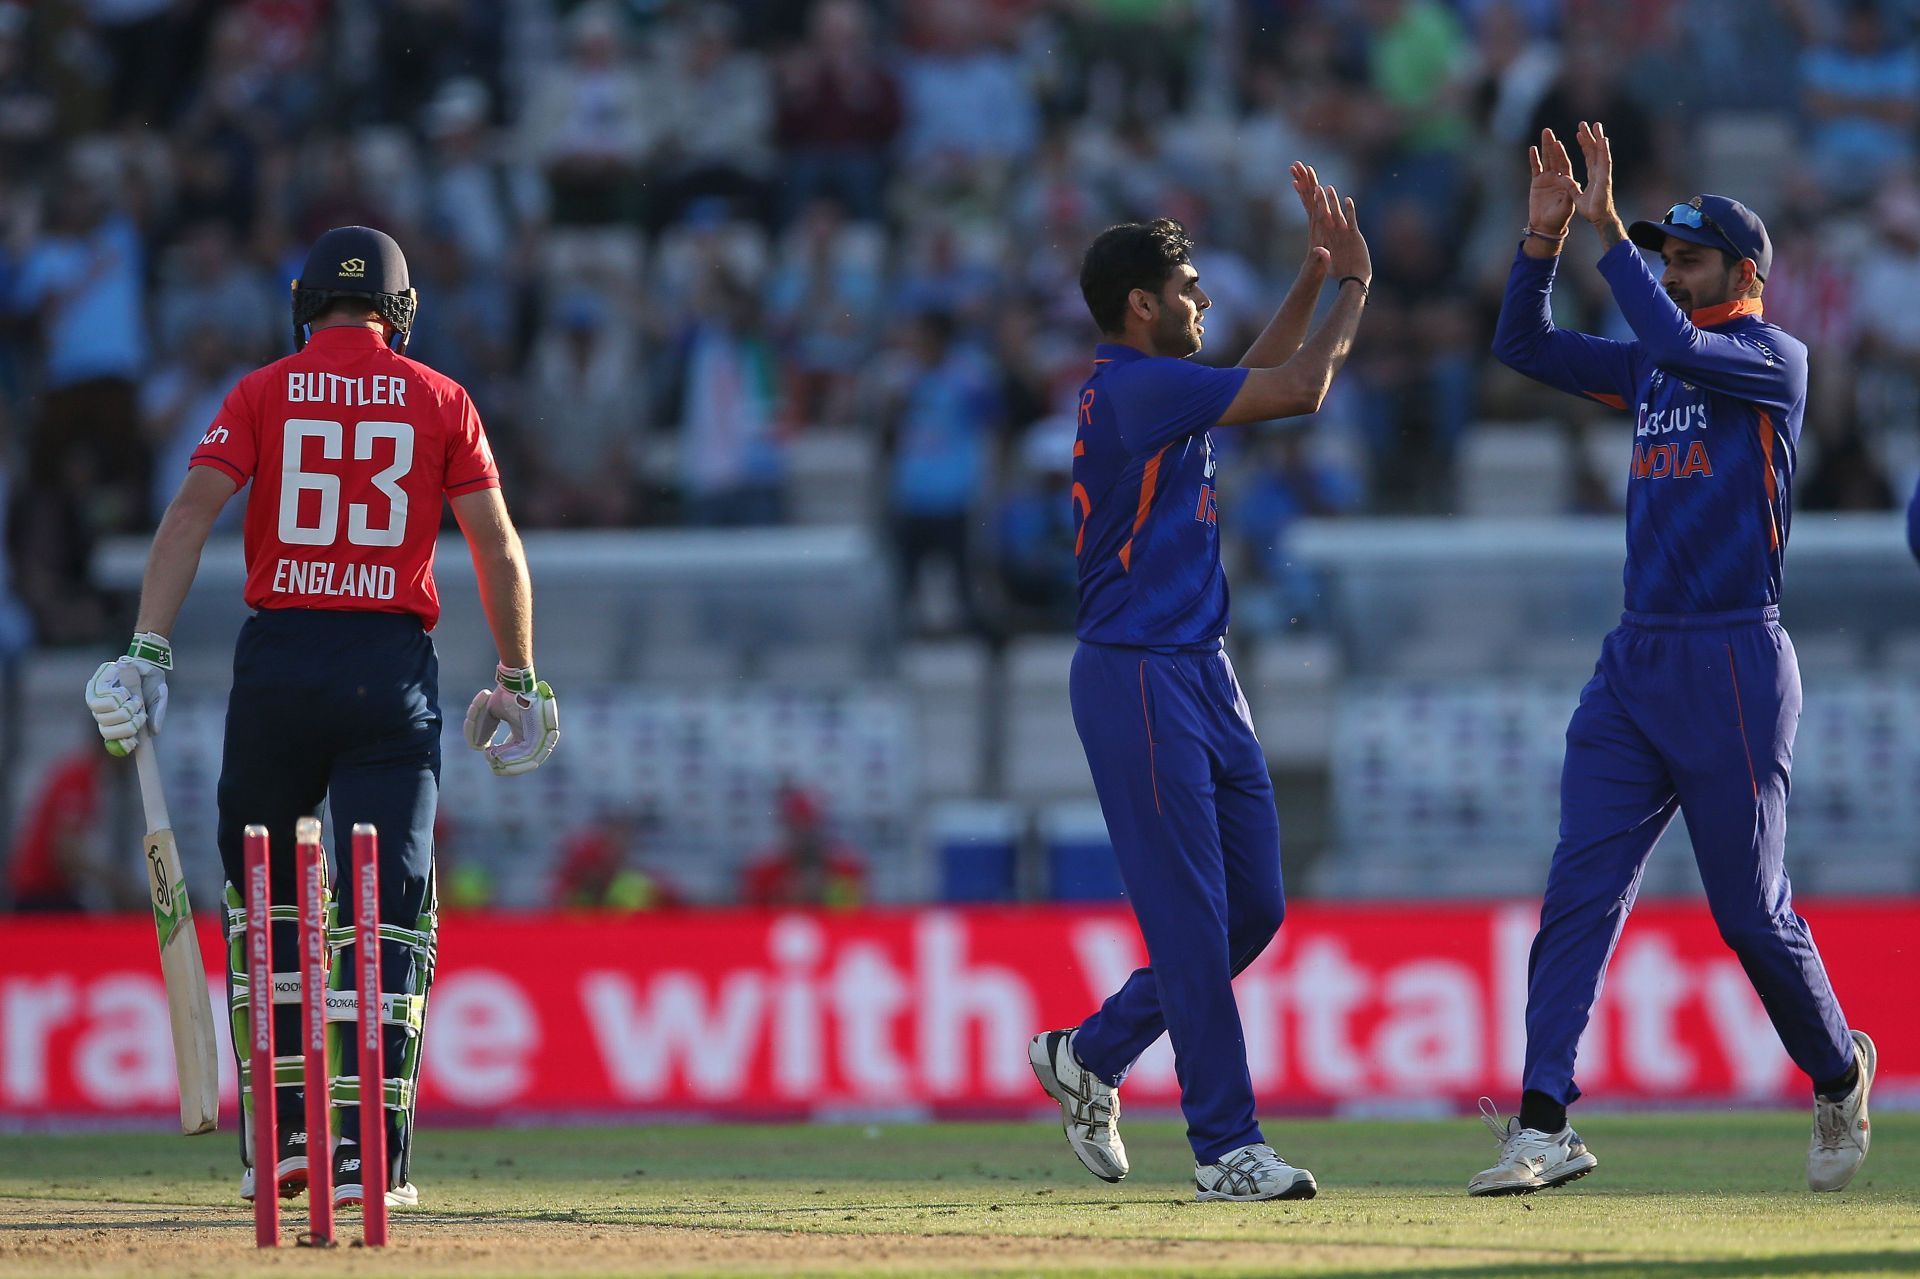 Bhuvneshwar Kumar celebrates after cleaning up Jos Buttler in the first India-England T20I.